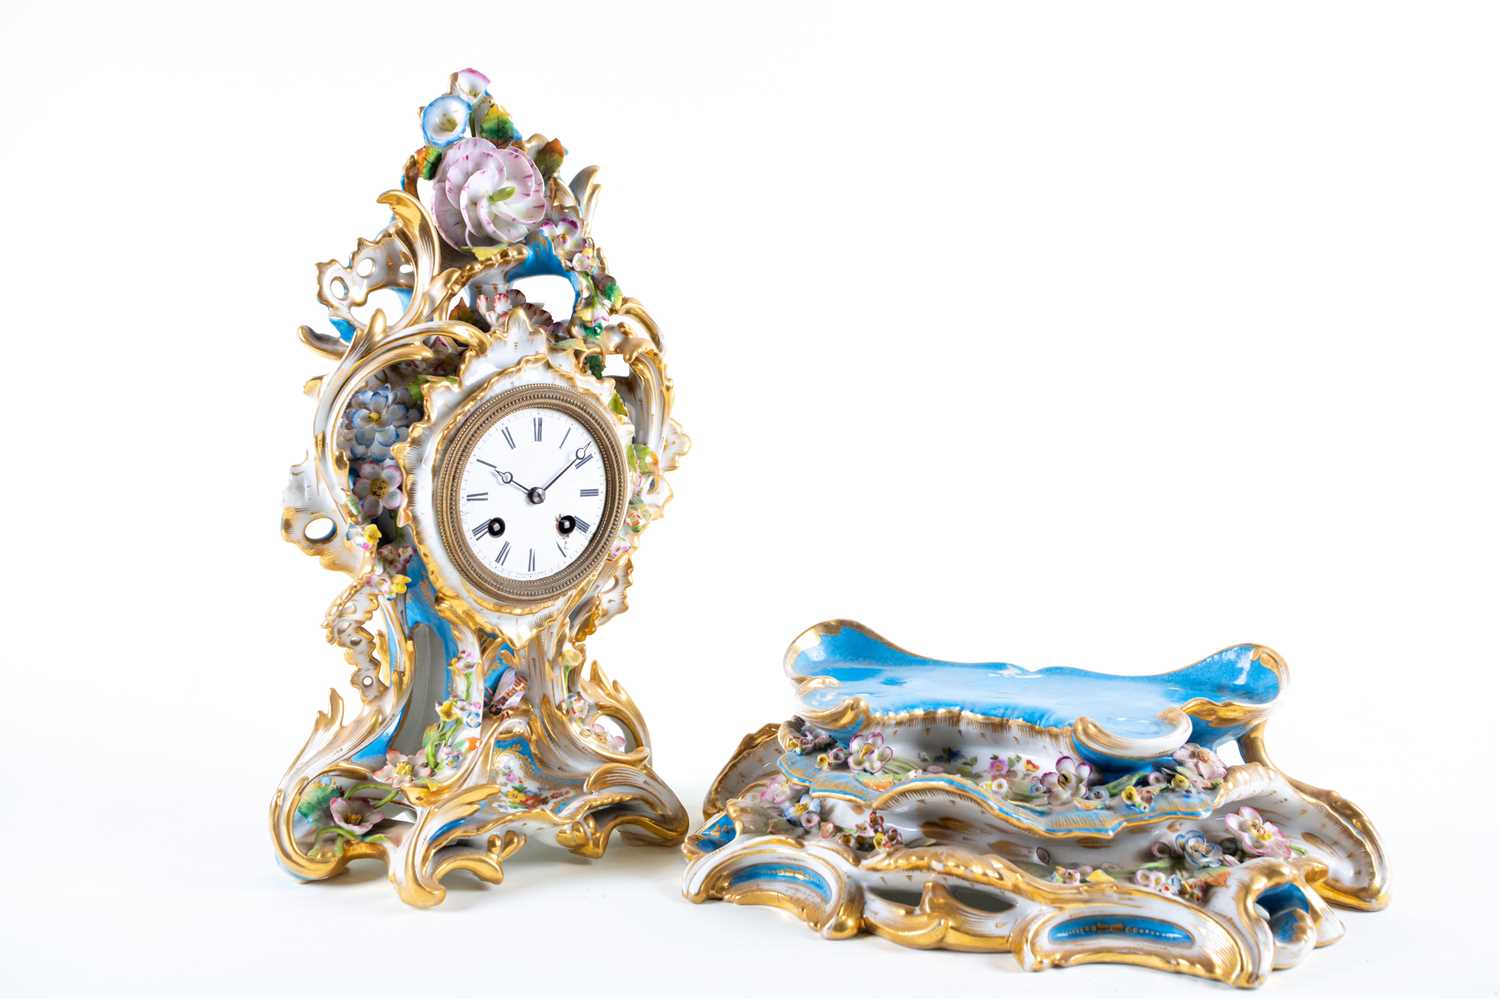 A 19th-century French porcelain chiming mantle clock on conforming stand, in the Sevres style with - Image 8 of 9